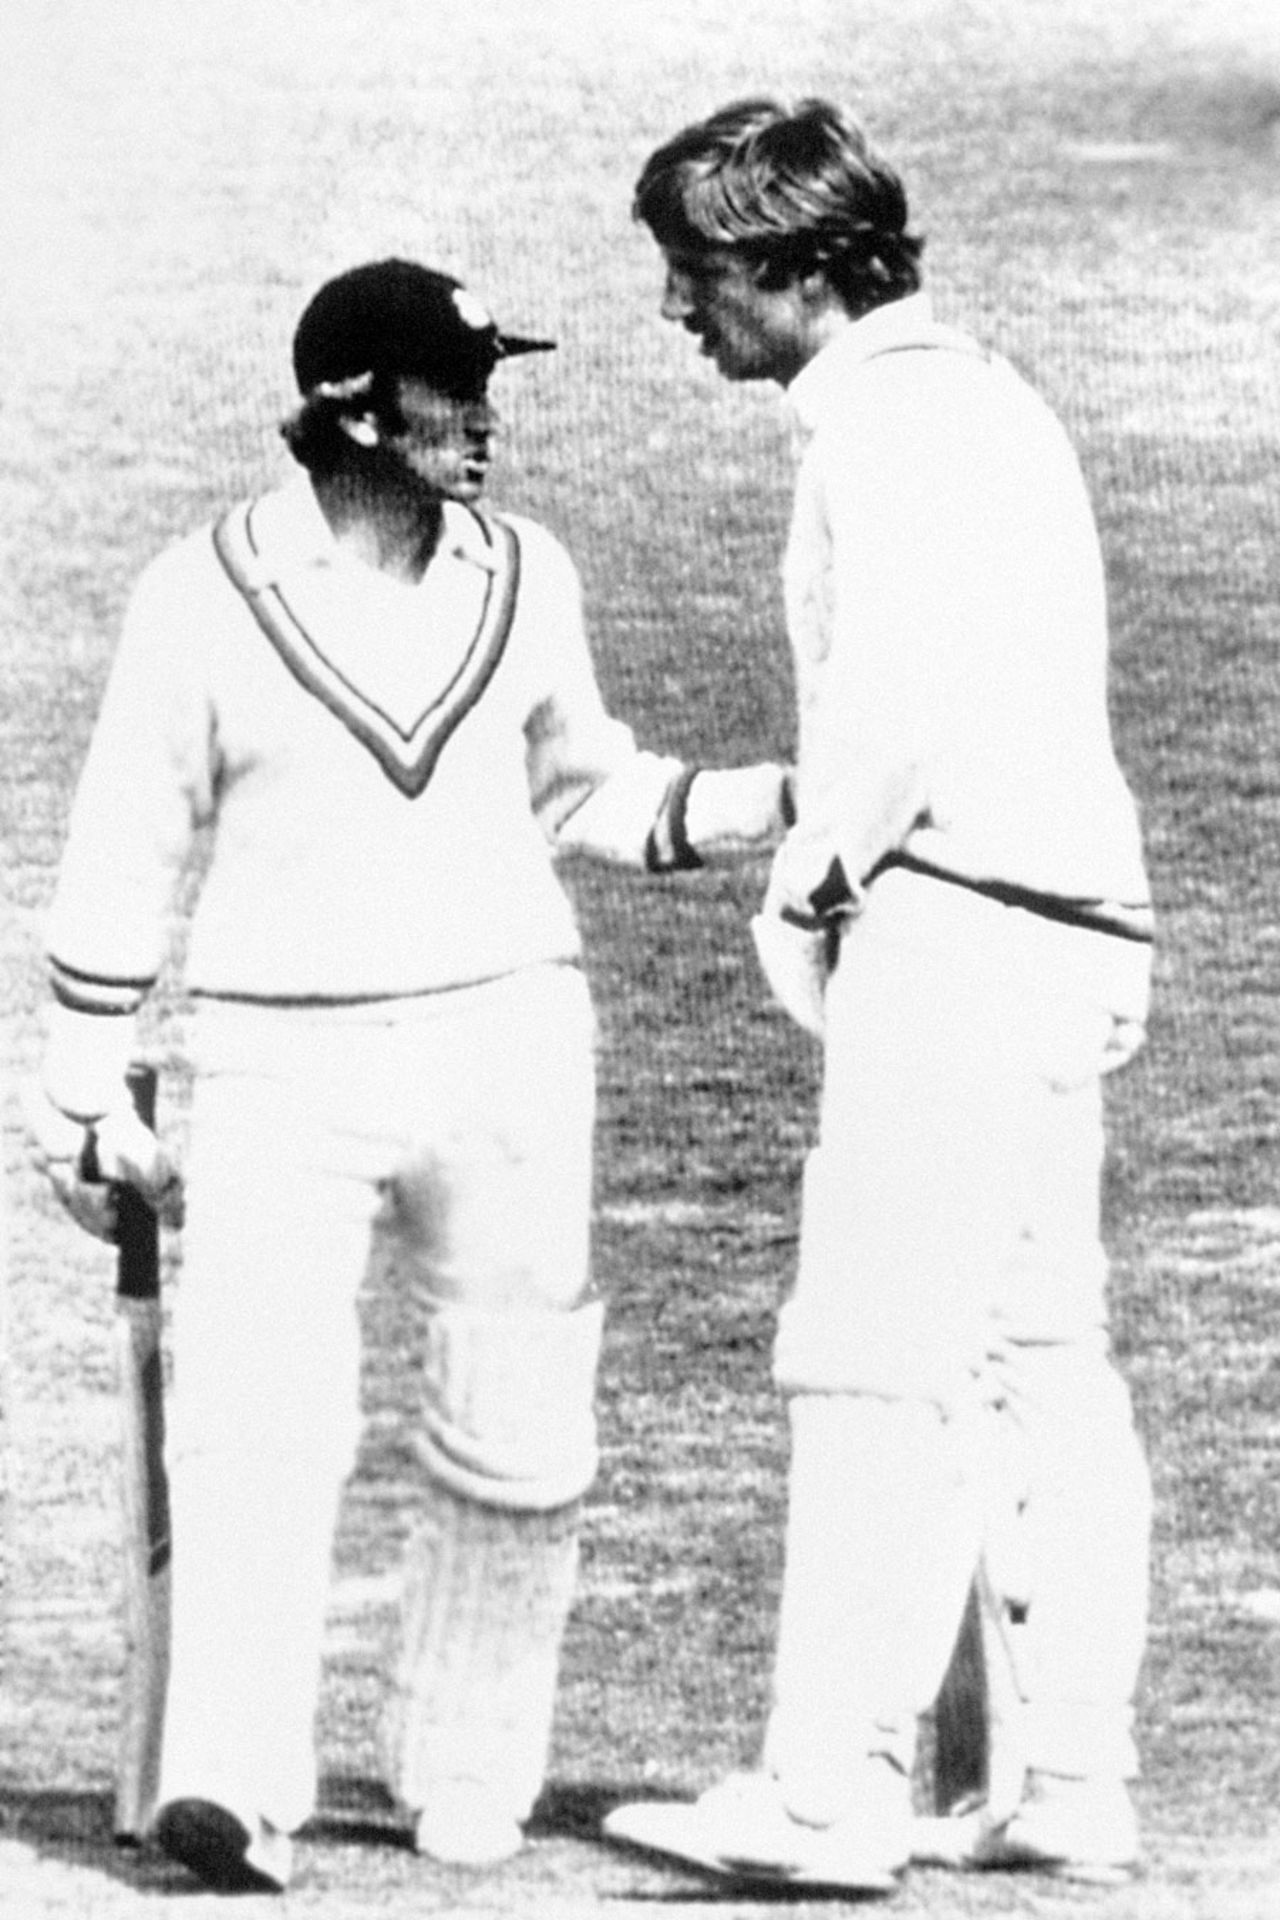 Ian Botham apologises to Bob Taylor after running him out, New Zealand v England, 2nd Test, Christchurch, February 25, 1978